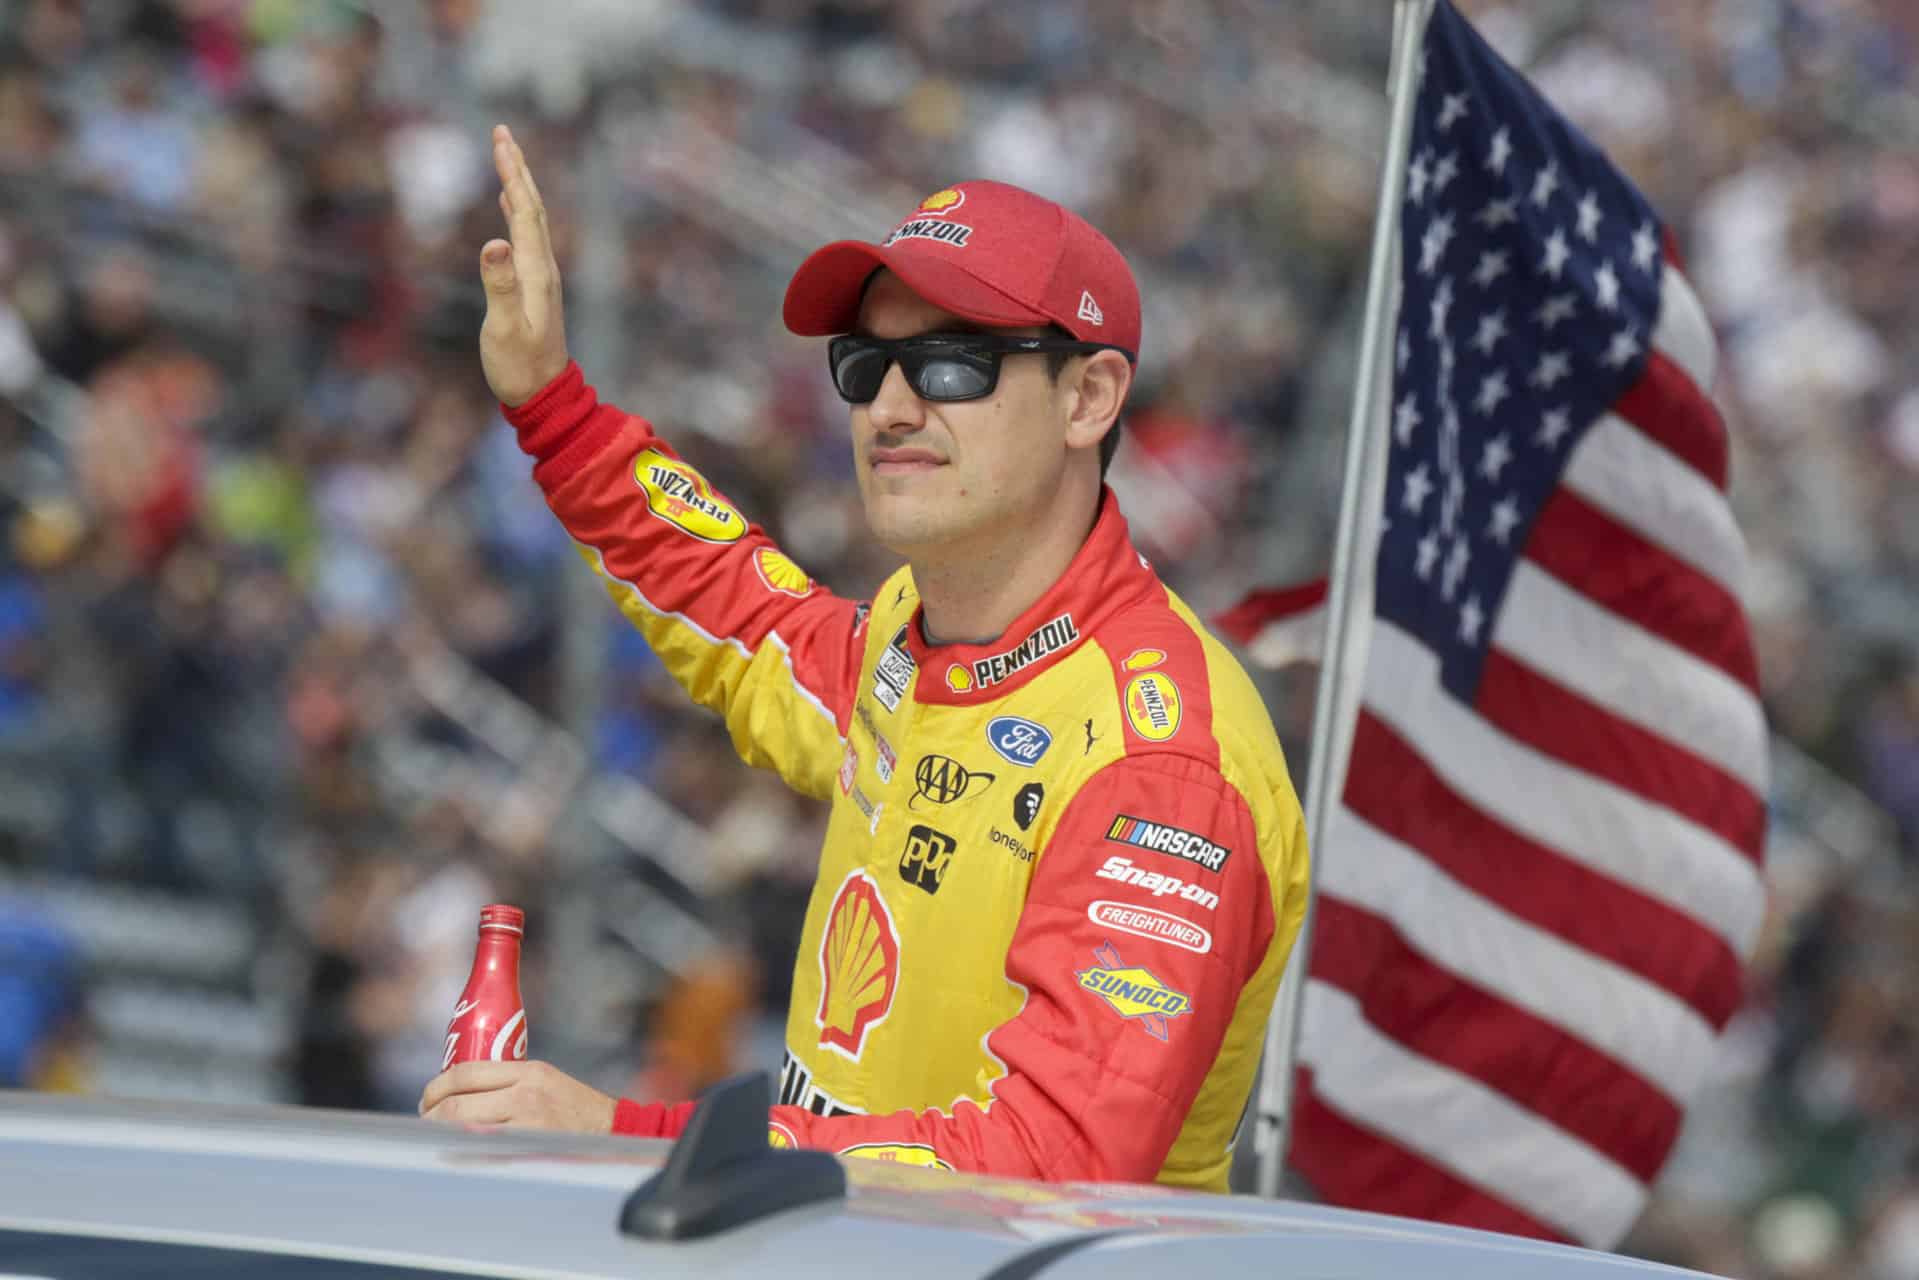 Joey Logano waves goodbye to his 2021 NASCAR Playoff hopes with lackluster run at Martinsville Speedway. Nigel Kinrade Photography